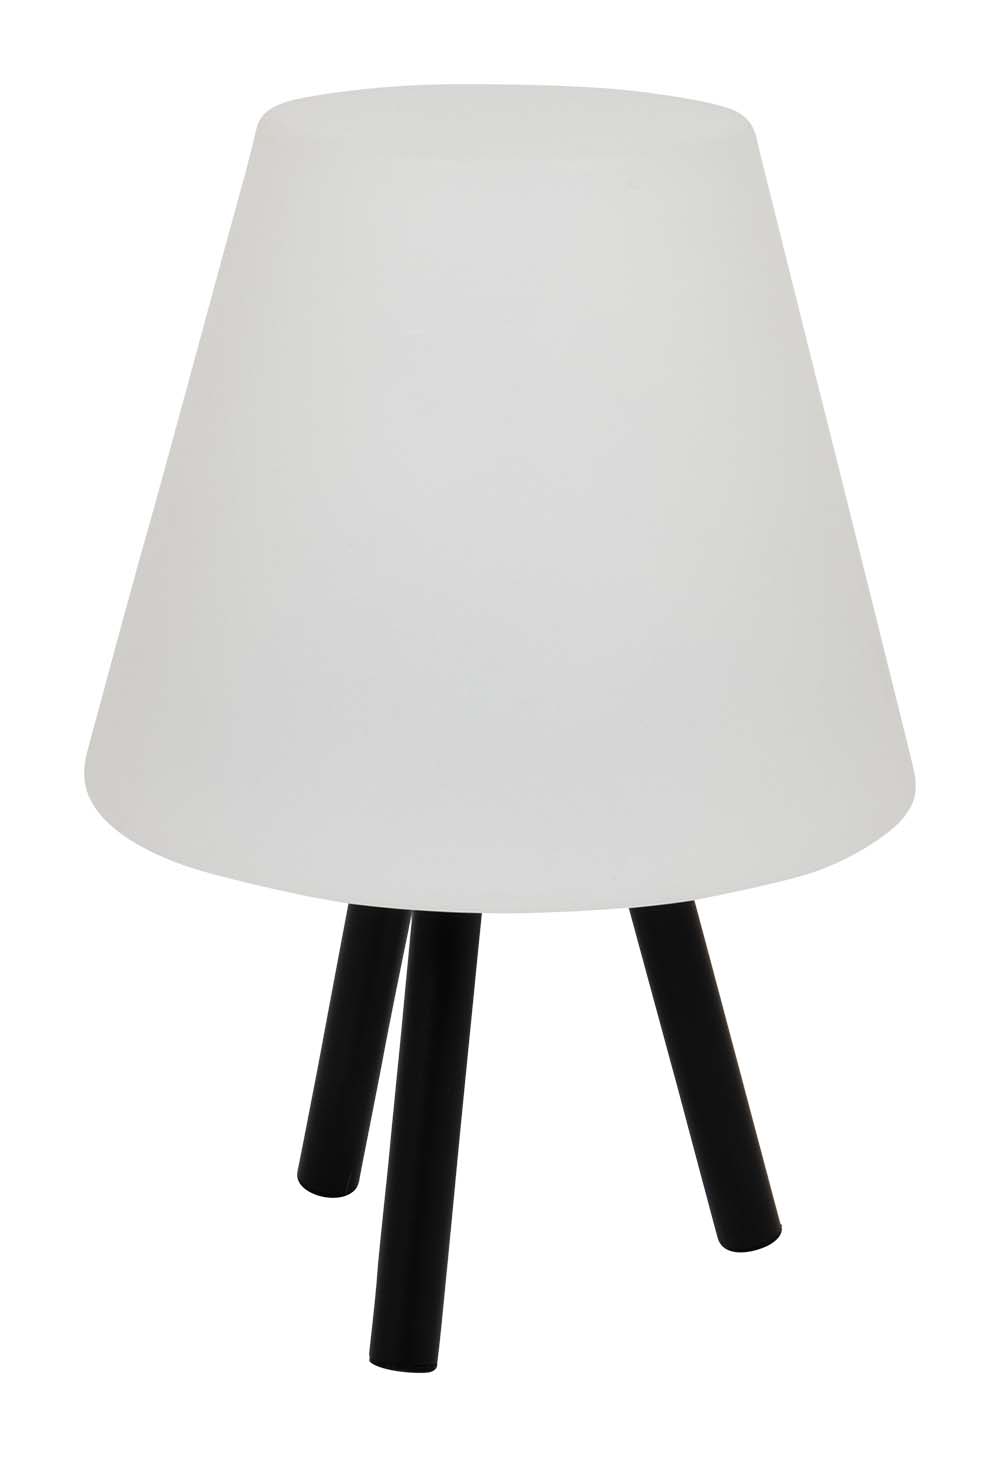 5818617 A sturdy lamp from the Industrial collection. It features 3 black aluminum legs. The lamp gives a pleasant light due to the LED with a warm light color and the white matte shade. It can be used in three light modes: 20%, 50% and 100%. The lamp comes with USB cable and equipped with a Li-ion battery.